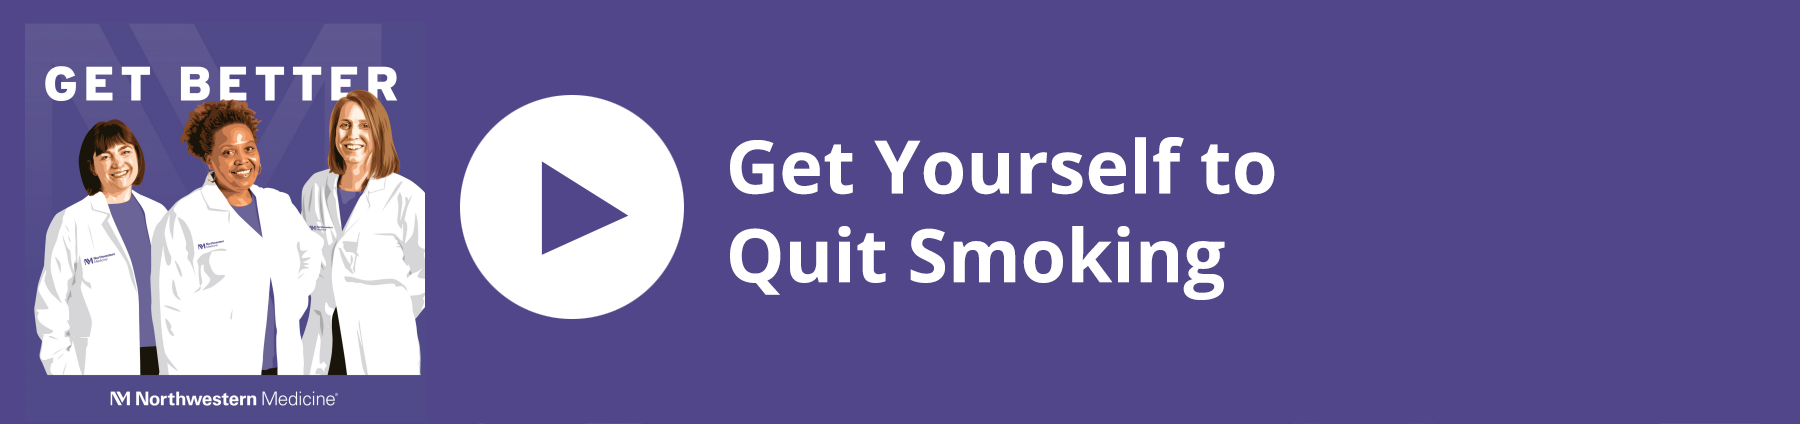 Get Better podcast player with logo, illustration of hosts, episode title: Get Yourself to Quit Smoking